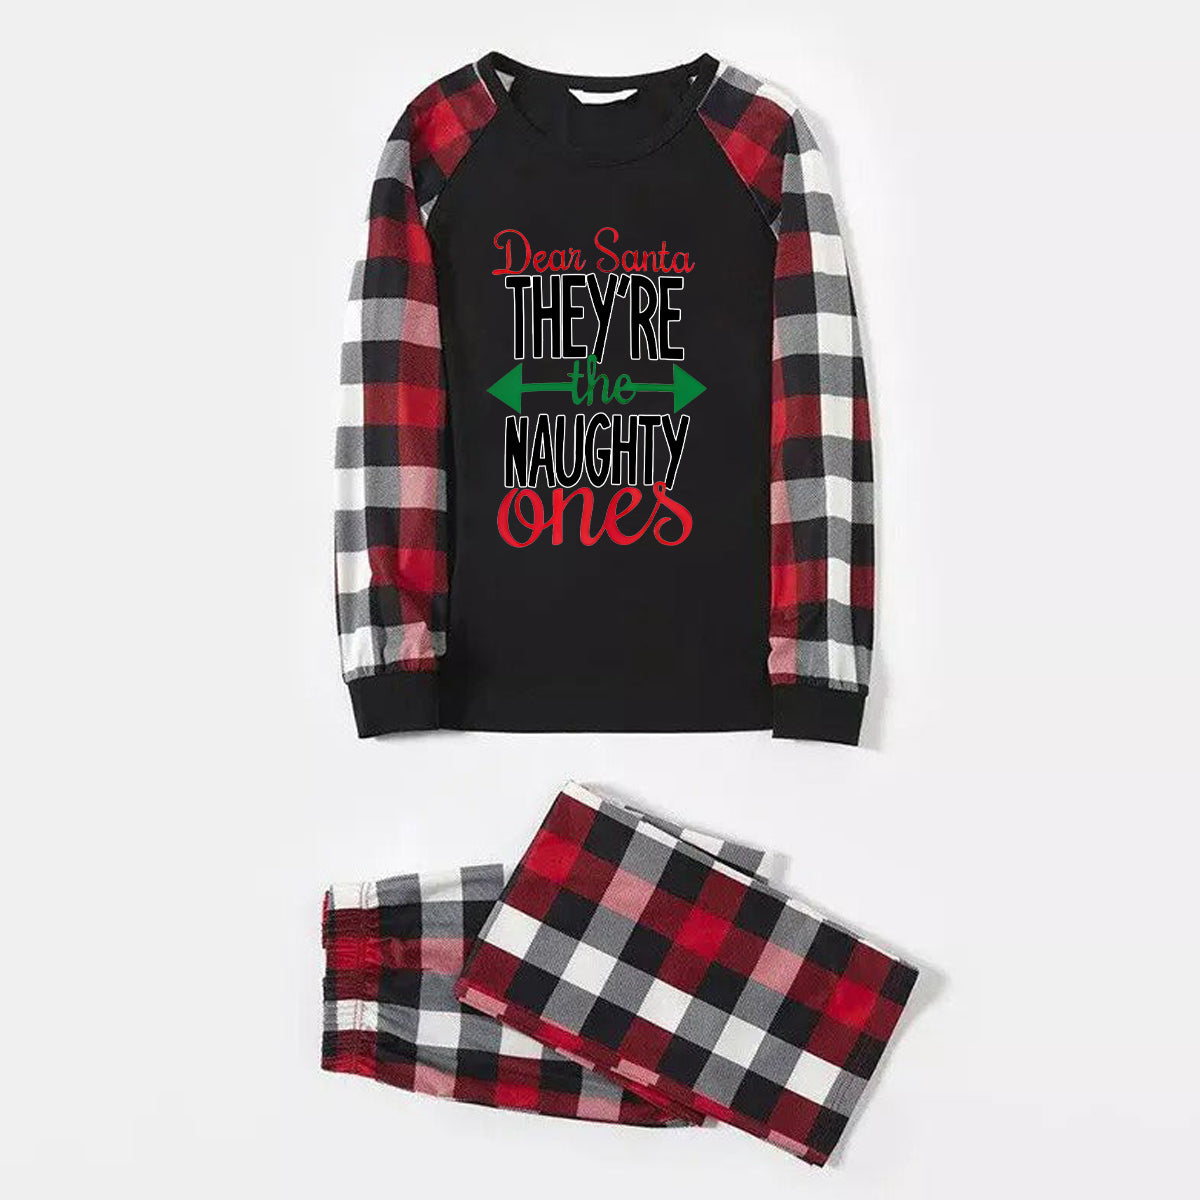 'Dear Santa Ther Are The Naughty One' Letter Print Casual Long Sleeve Sweatshirts Contrast Tops and Red & Black & White Plaid Pants Family Matching Pajamas Set With Dog Bandana